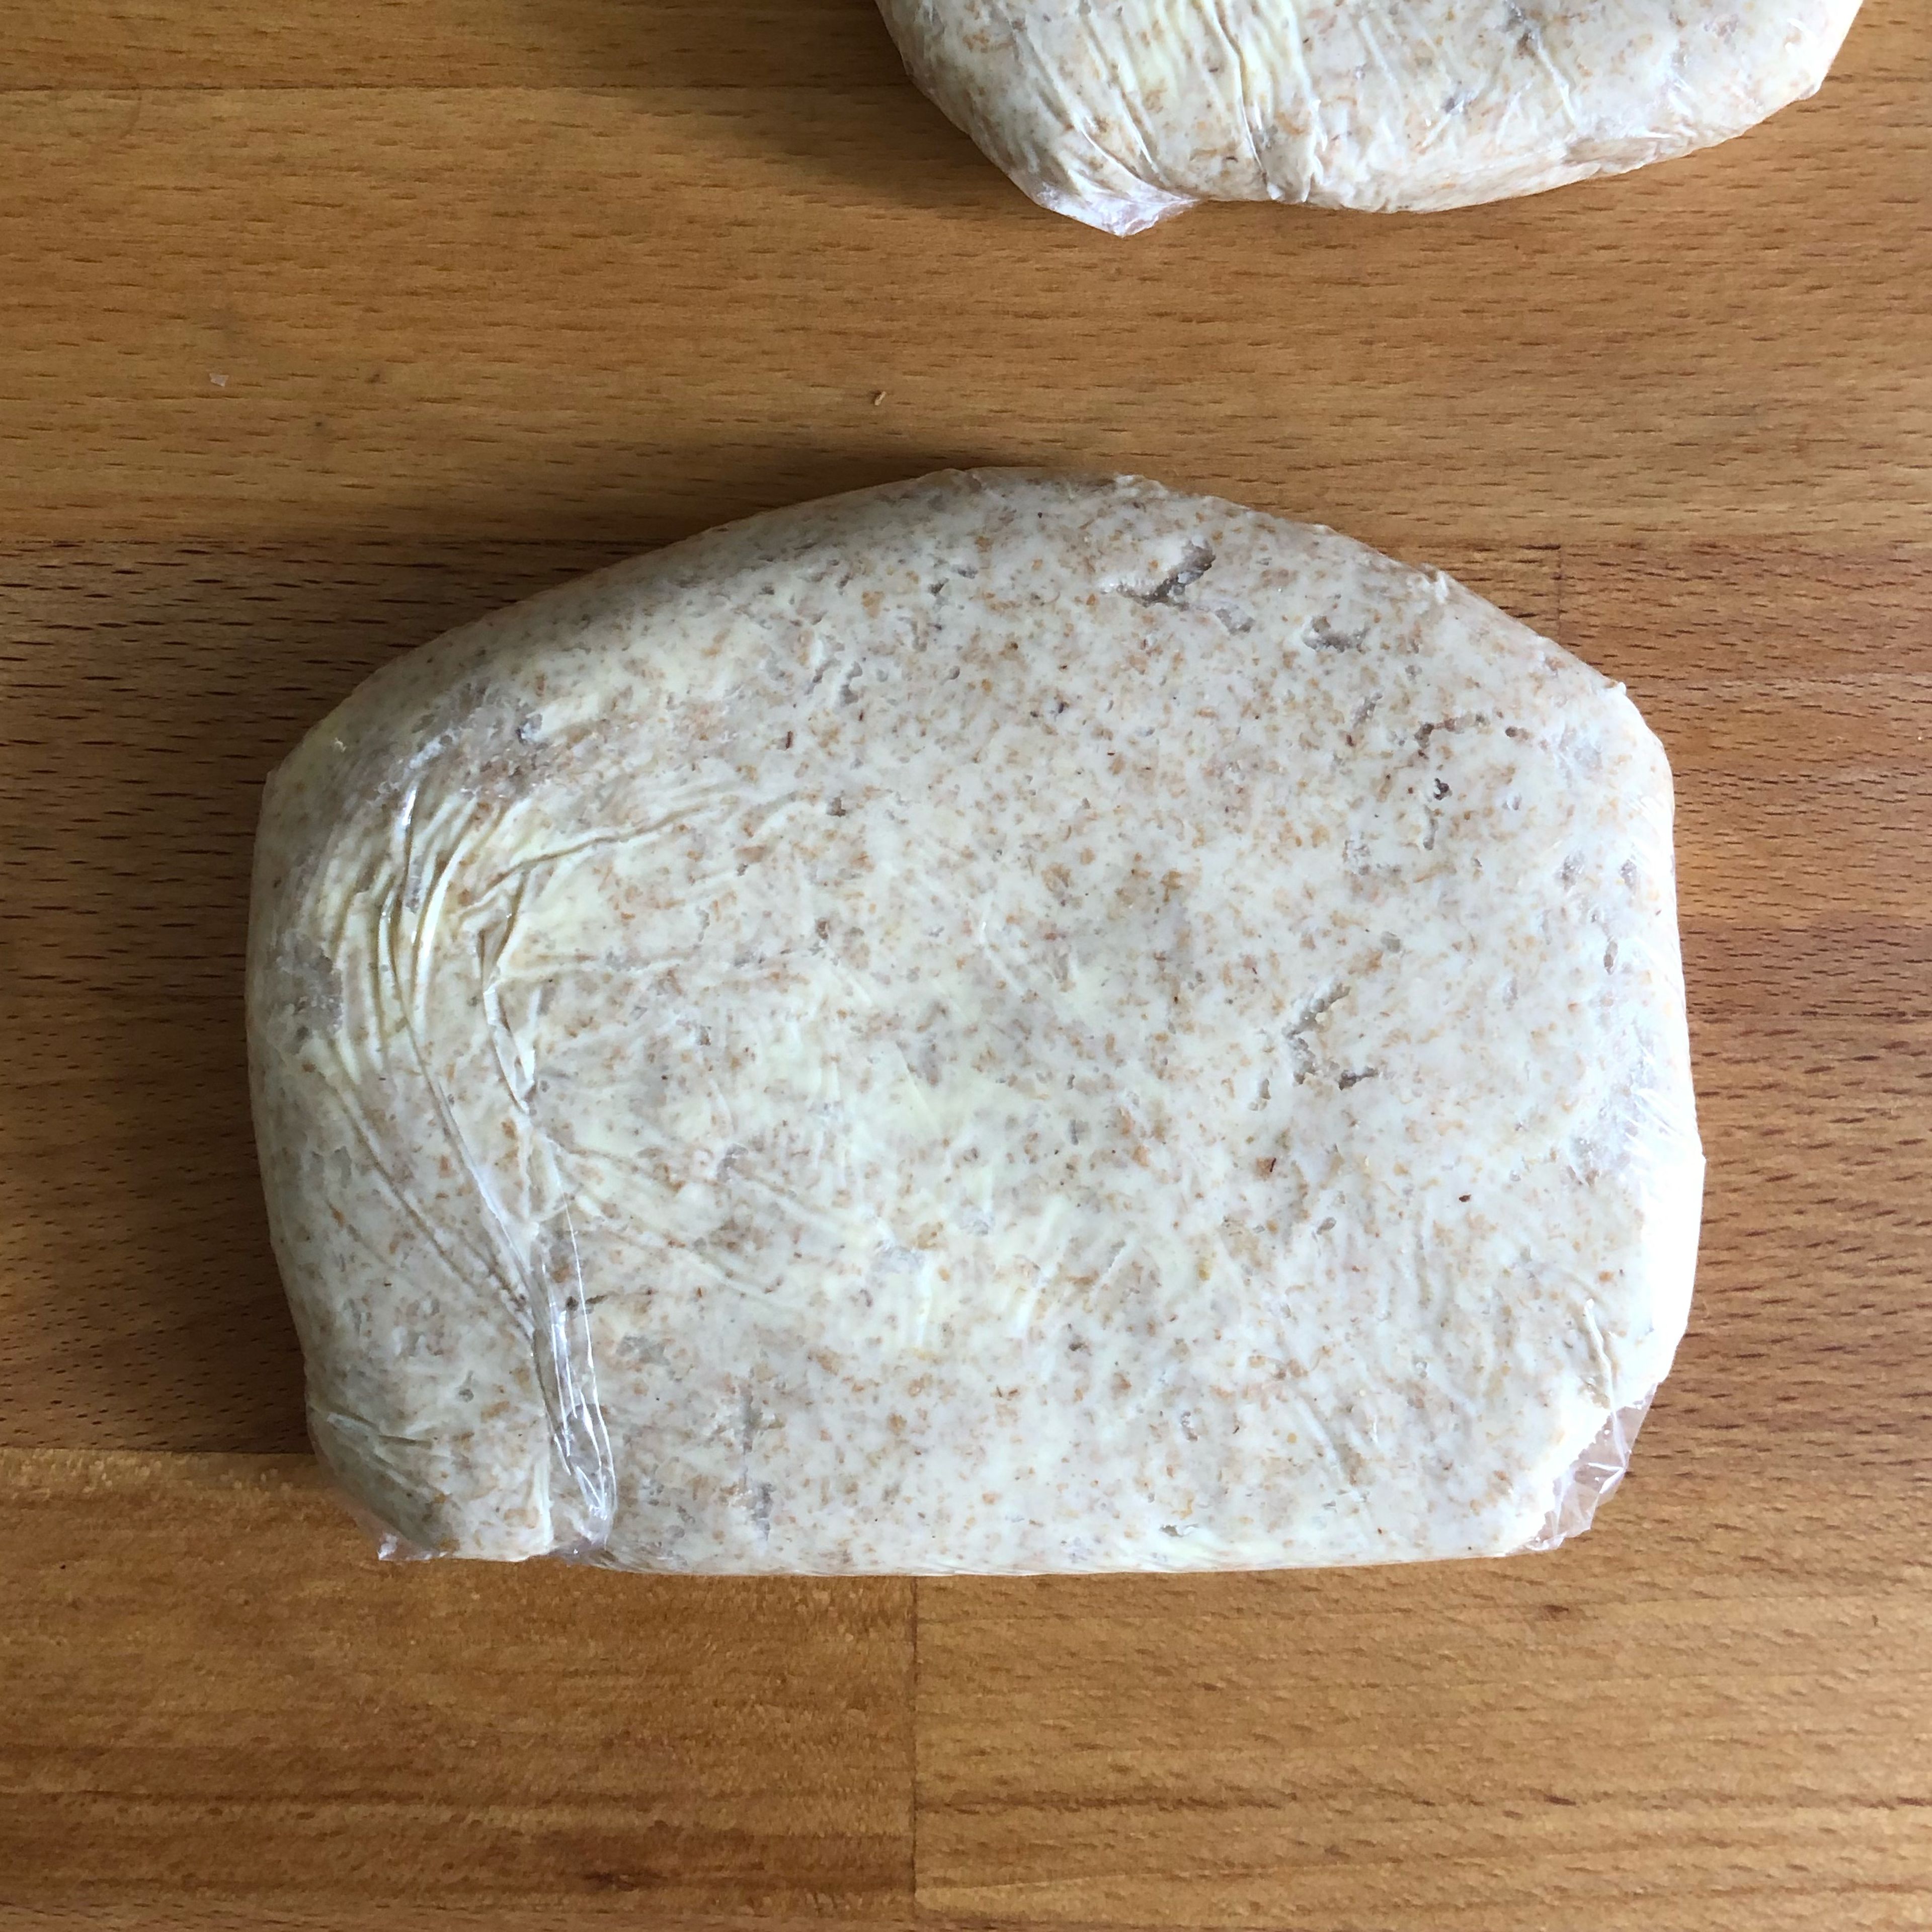 Mix sourdough starter, flour, butter, and salt in a bowl to form a sticky dough. Split dough in half and wrap each half loosely in plastic wrap. Form into a flat rectangle-ish shape, transfer to the fridge and let chill for at least 30 min.